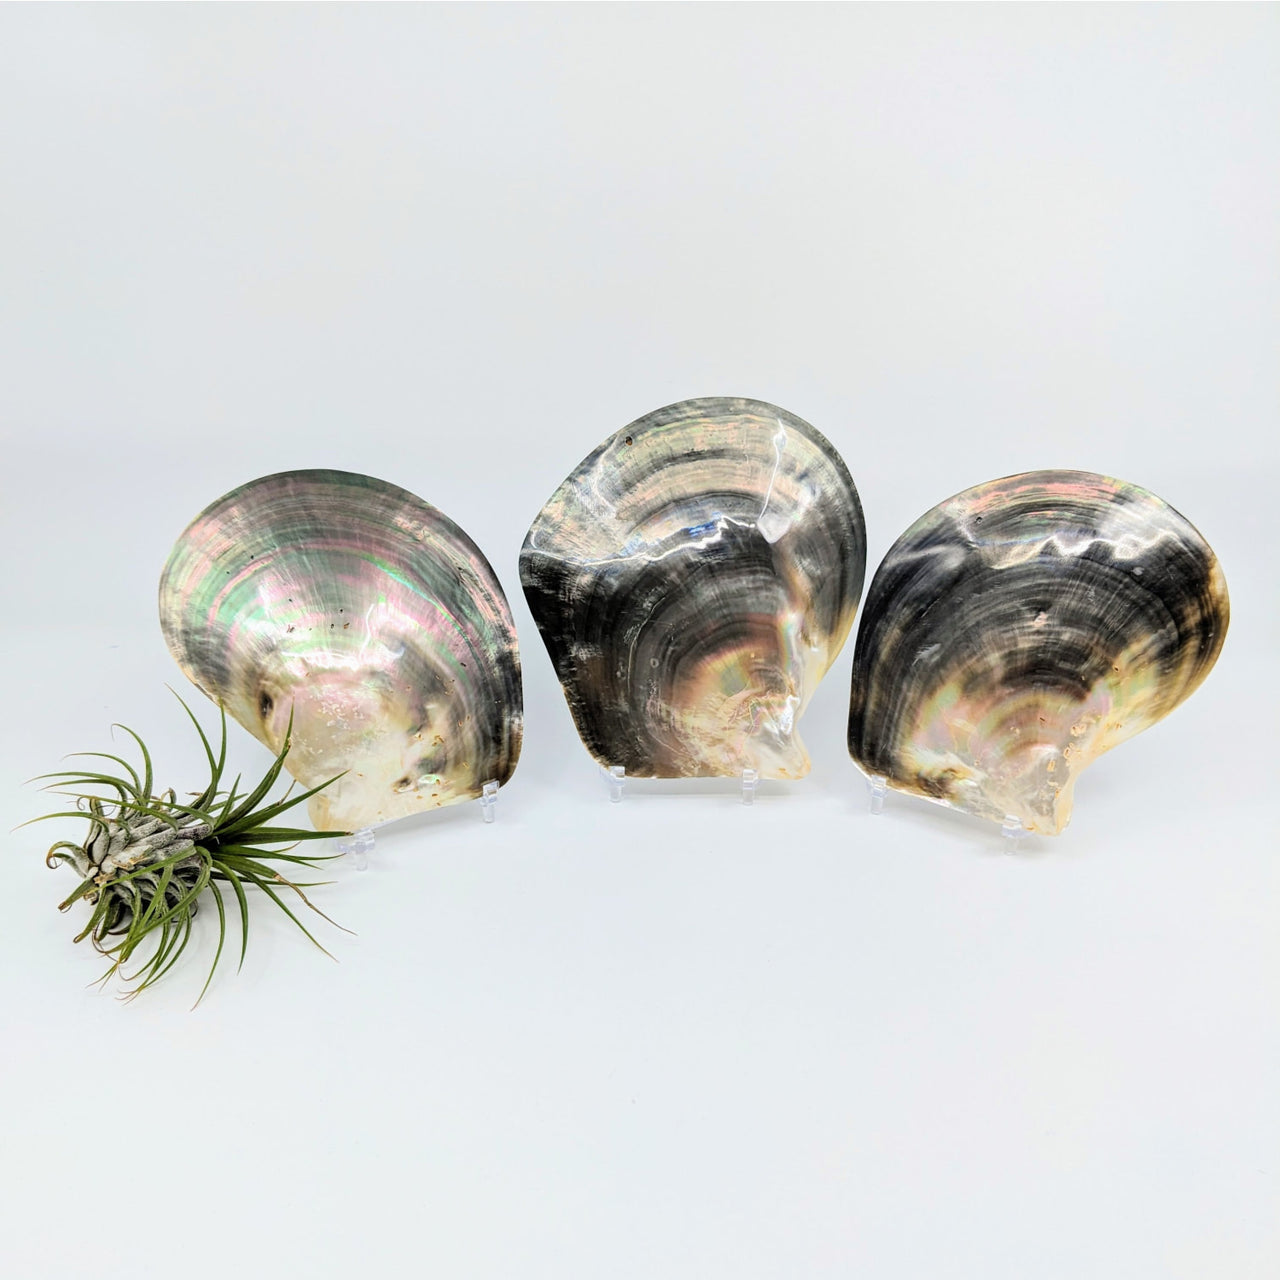 Glass bowls with small plant in Polished Smooth Abalone Shell #LV4775 display